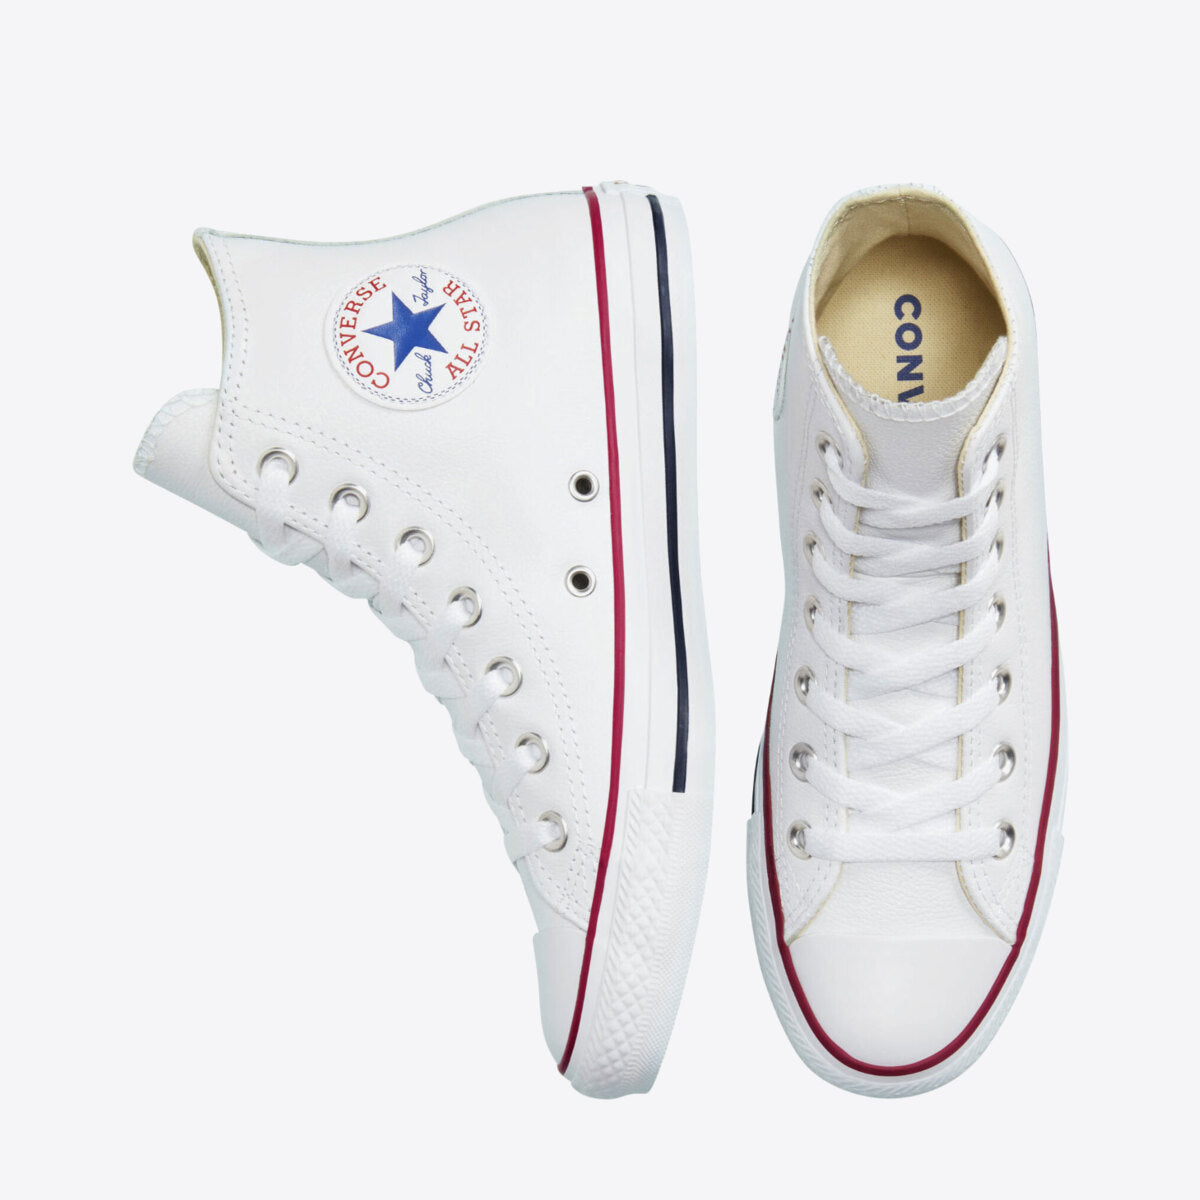 CONVERSE Chuck Taylor All Star Leather High White - Image 4